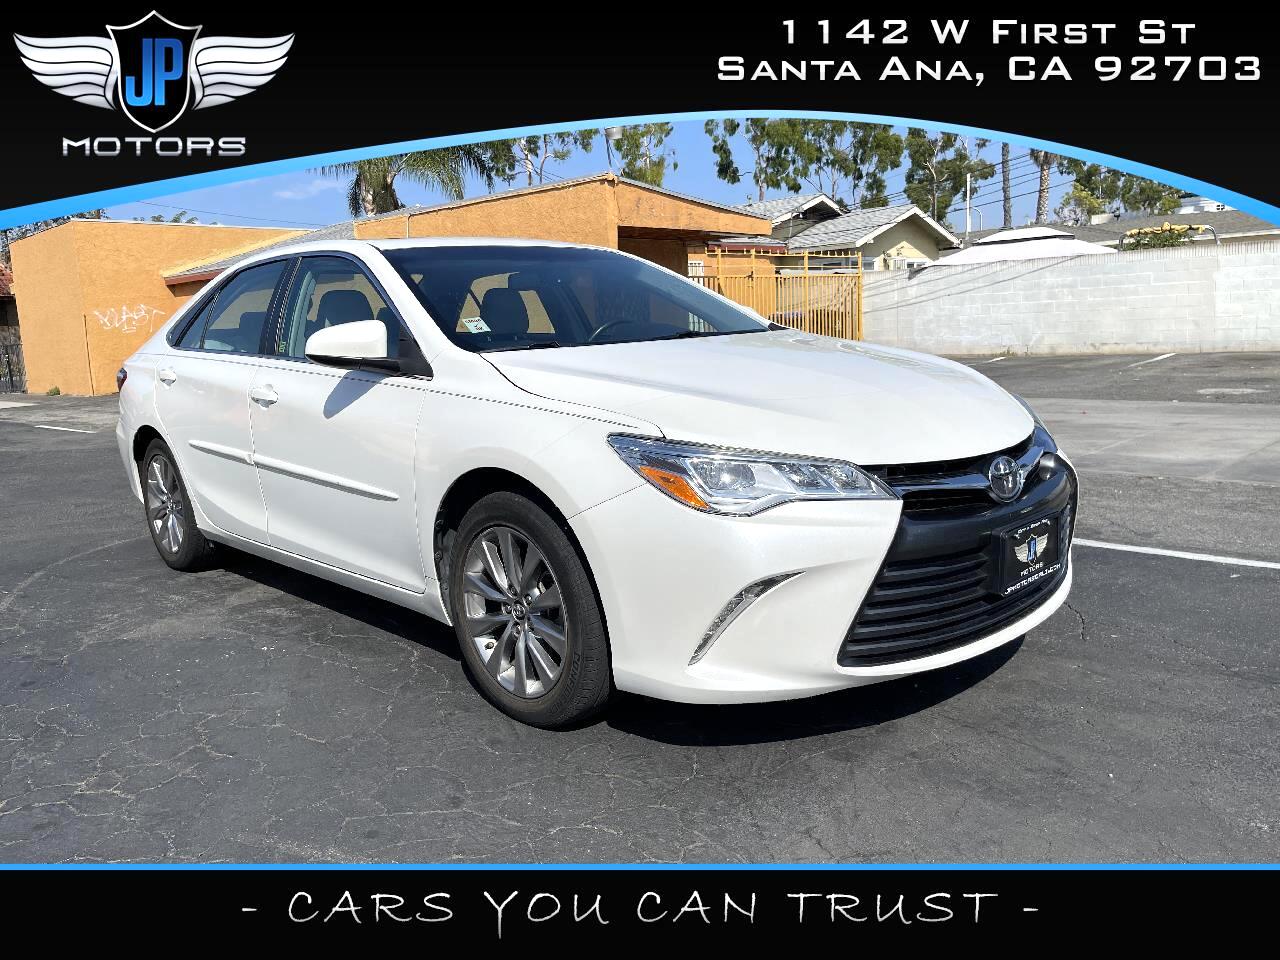 Toyota Camry 4dr Sdn V6 Auto XLE (Natl) 2016